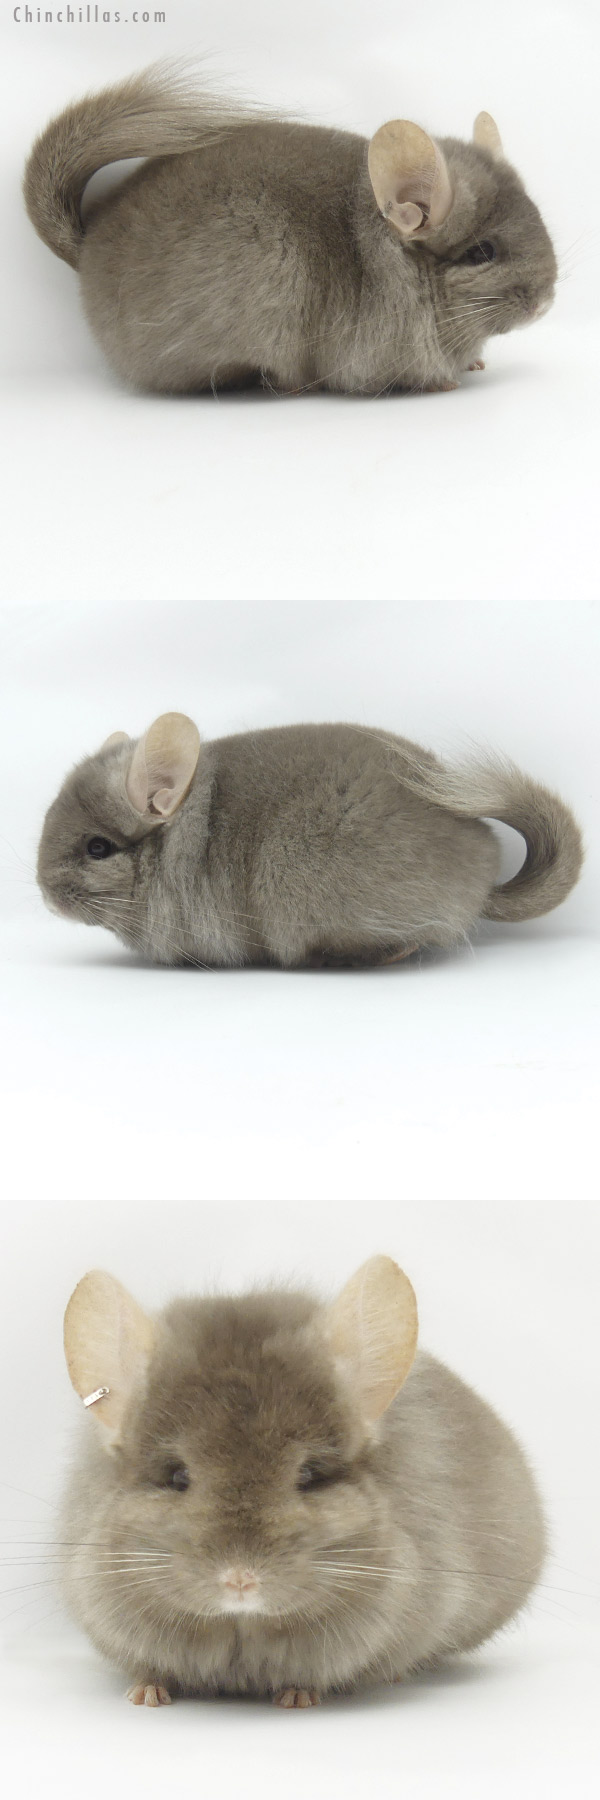 Chinchilla or related item offered for sale or export on Chinchillas.com - 20049 Exceptional Tan ( Locken Carrier )  Royal Persian Angora Female Chinchilla